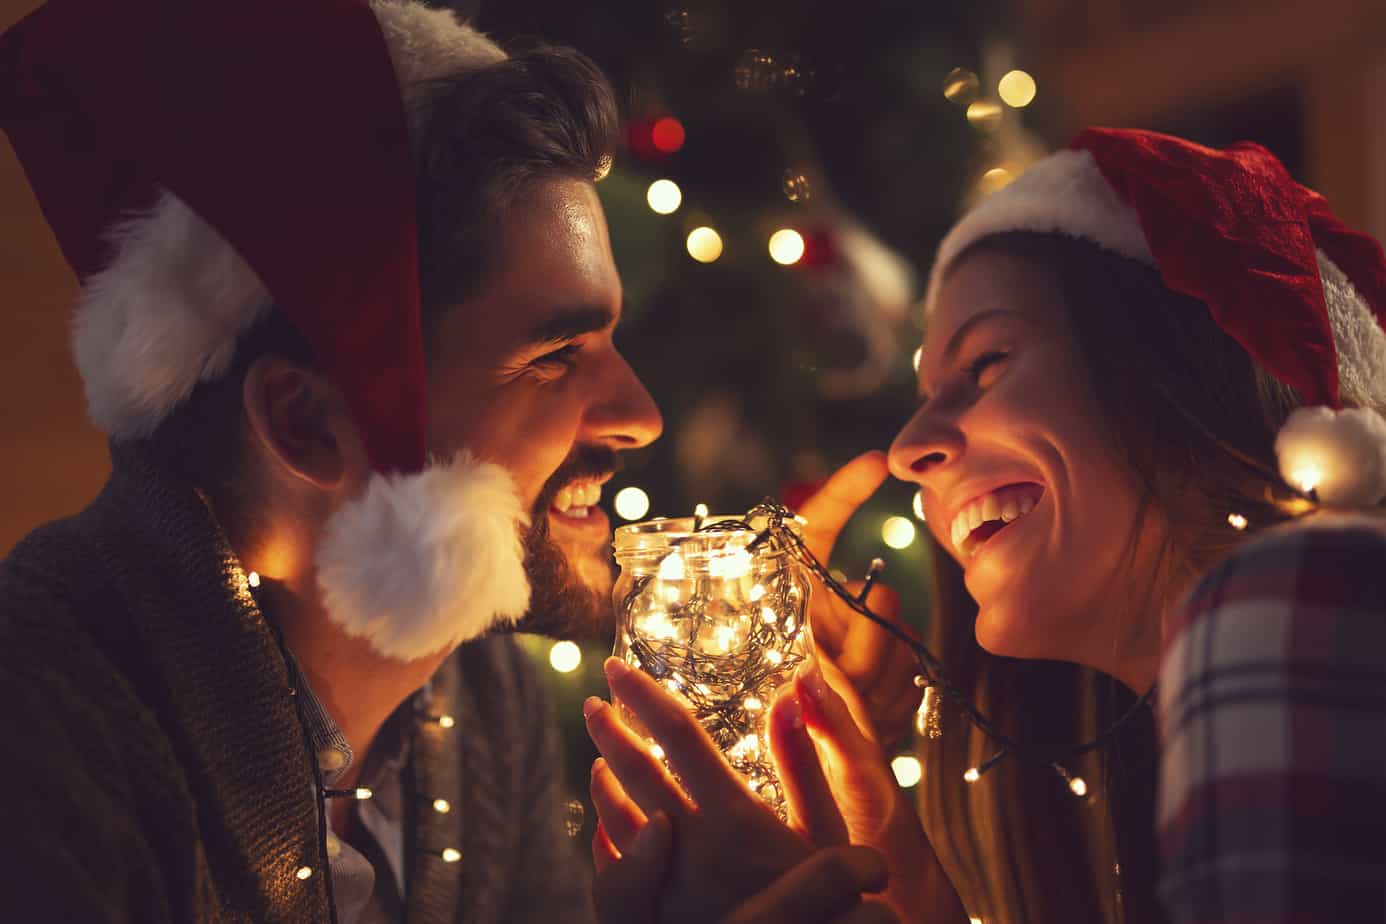 Host the Perfect Christmas Eve Date with These Ideas!